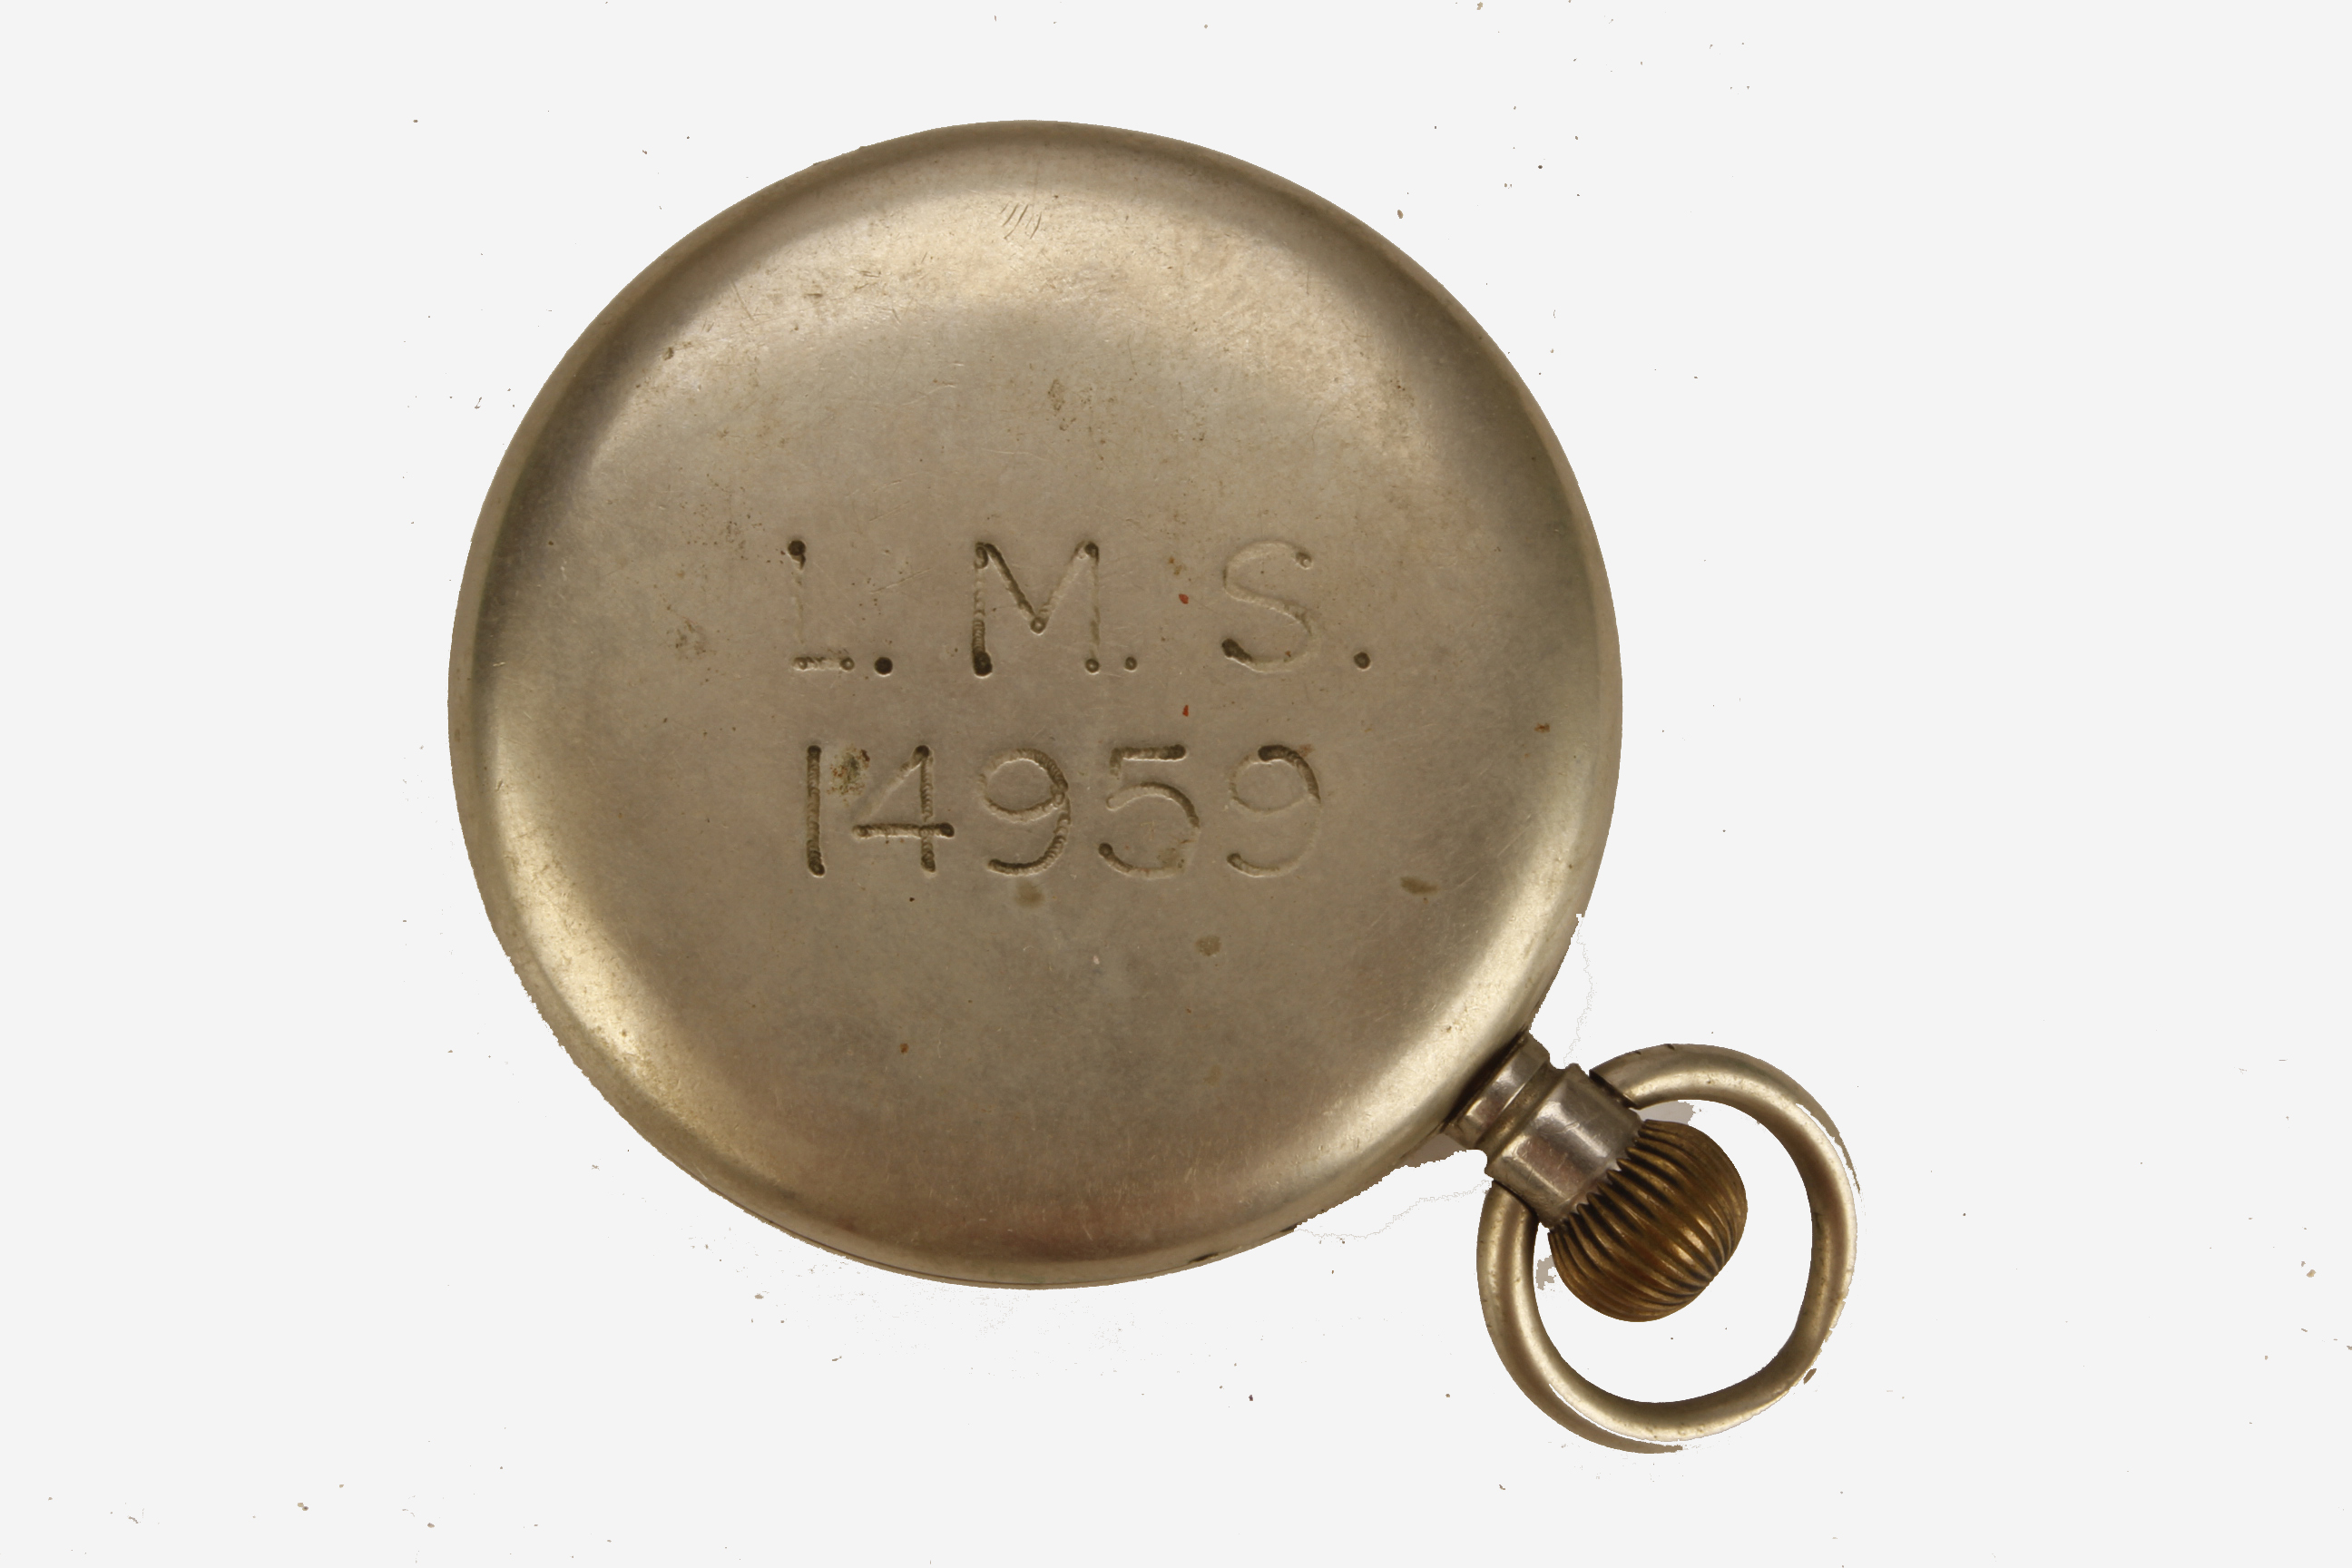 A LMS Pocket Watch, Swiss Made 15 Jewels, stamped LMS 14959 on back, in non related leather pouch, - Image 2 of 2